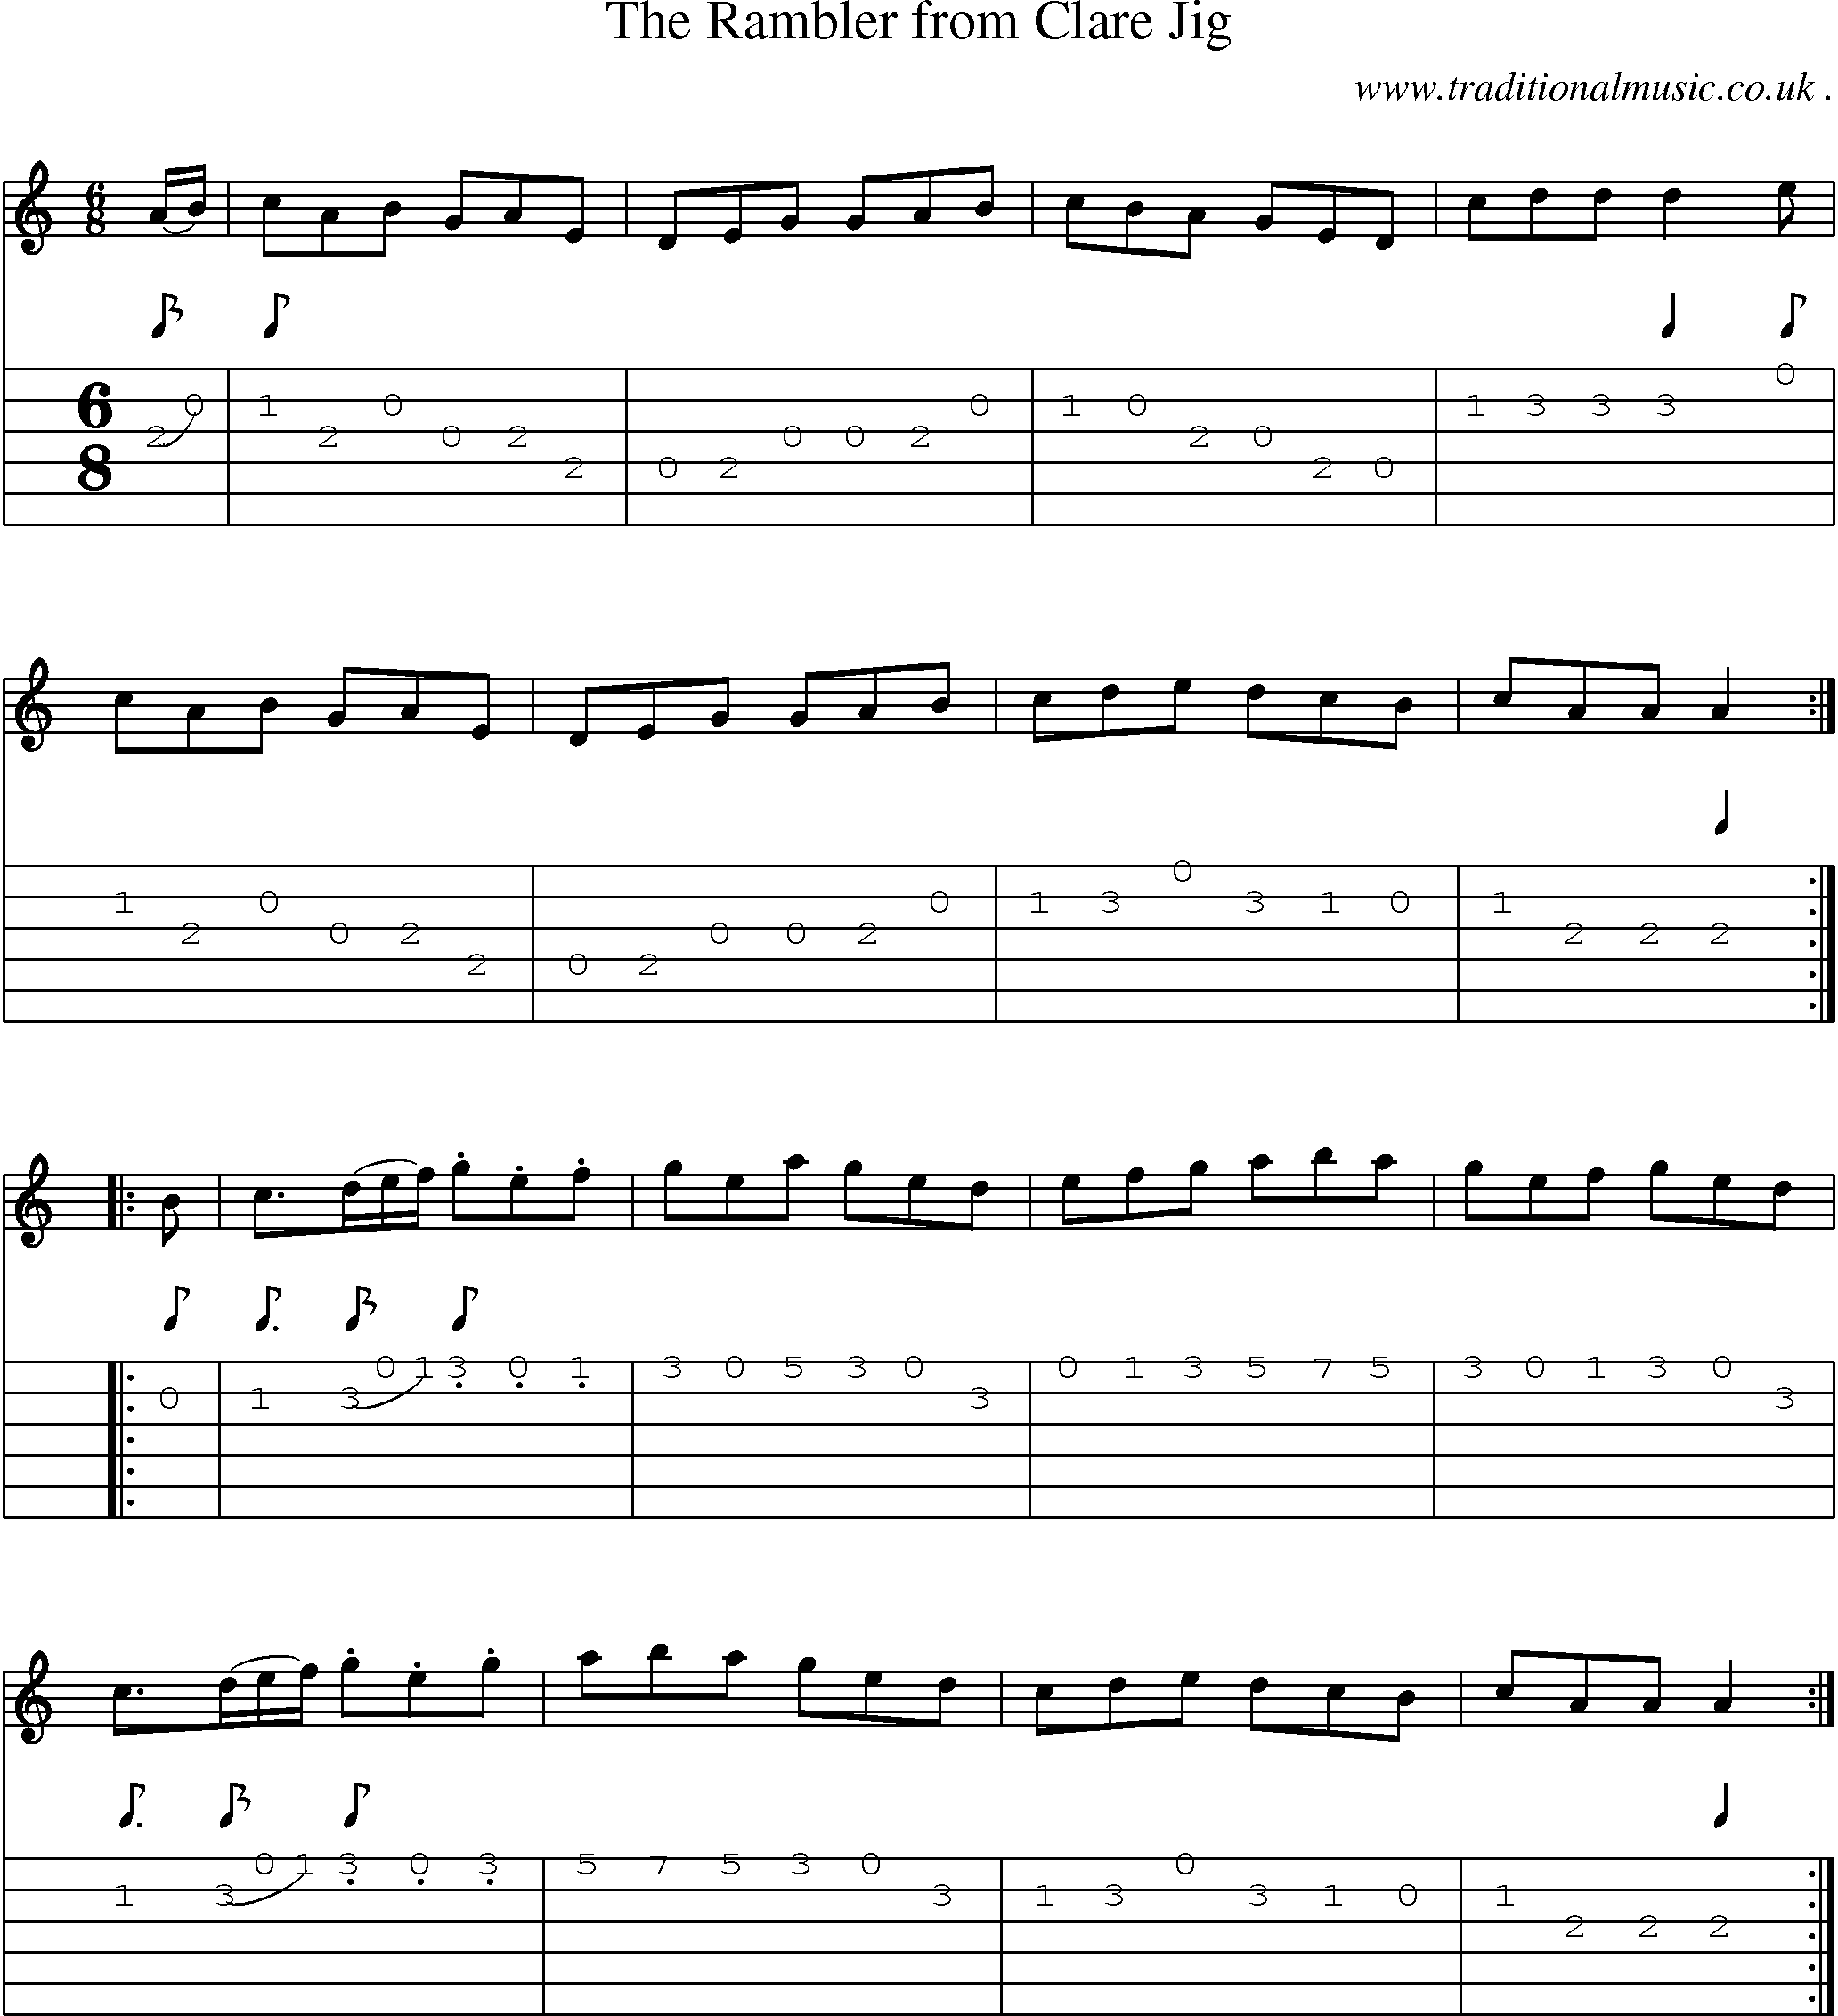 Sheet-Music and Guitar Tabs for The Rambler From Clare Jig